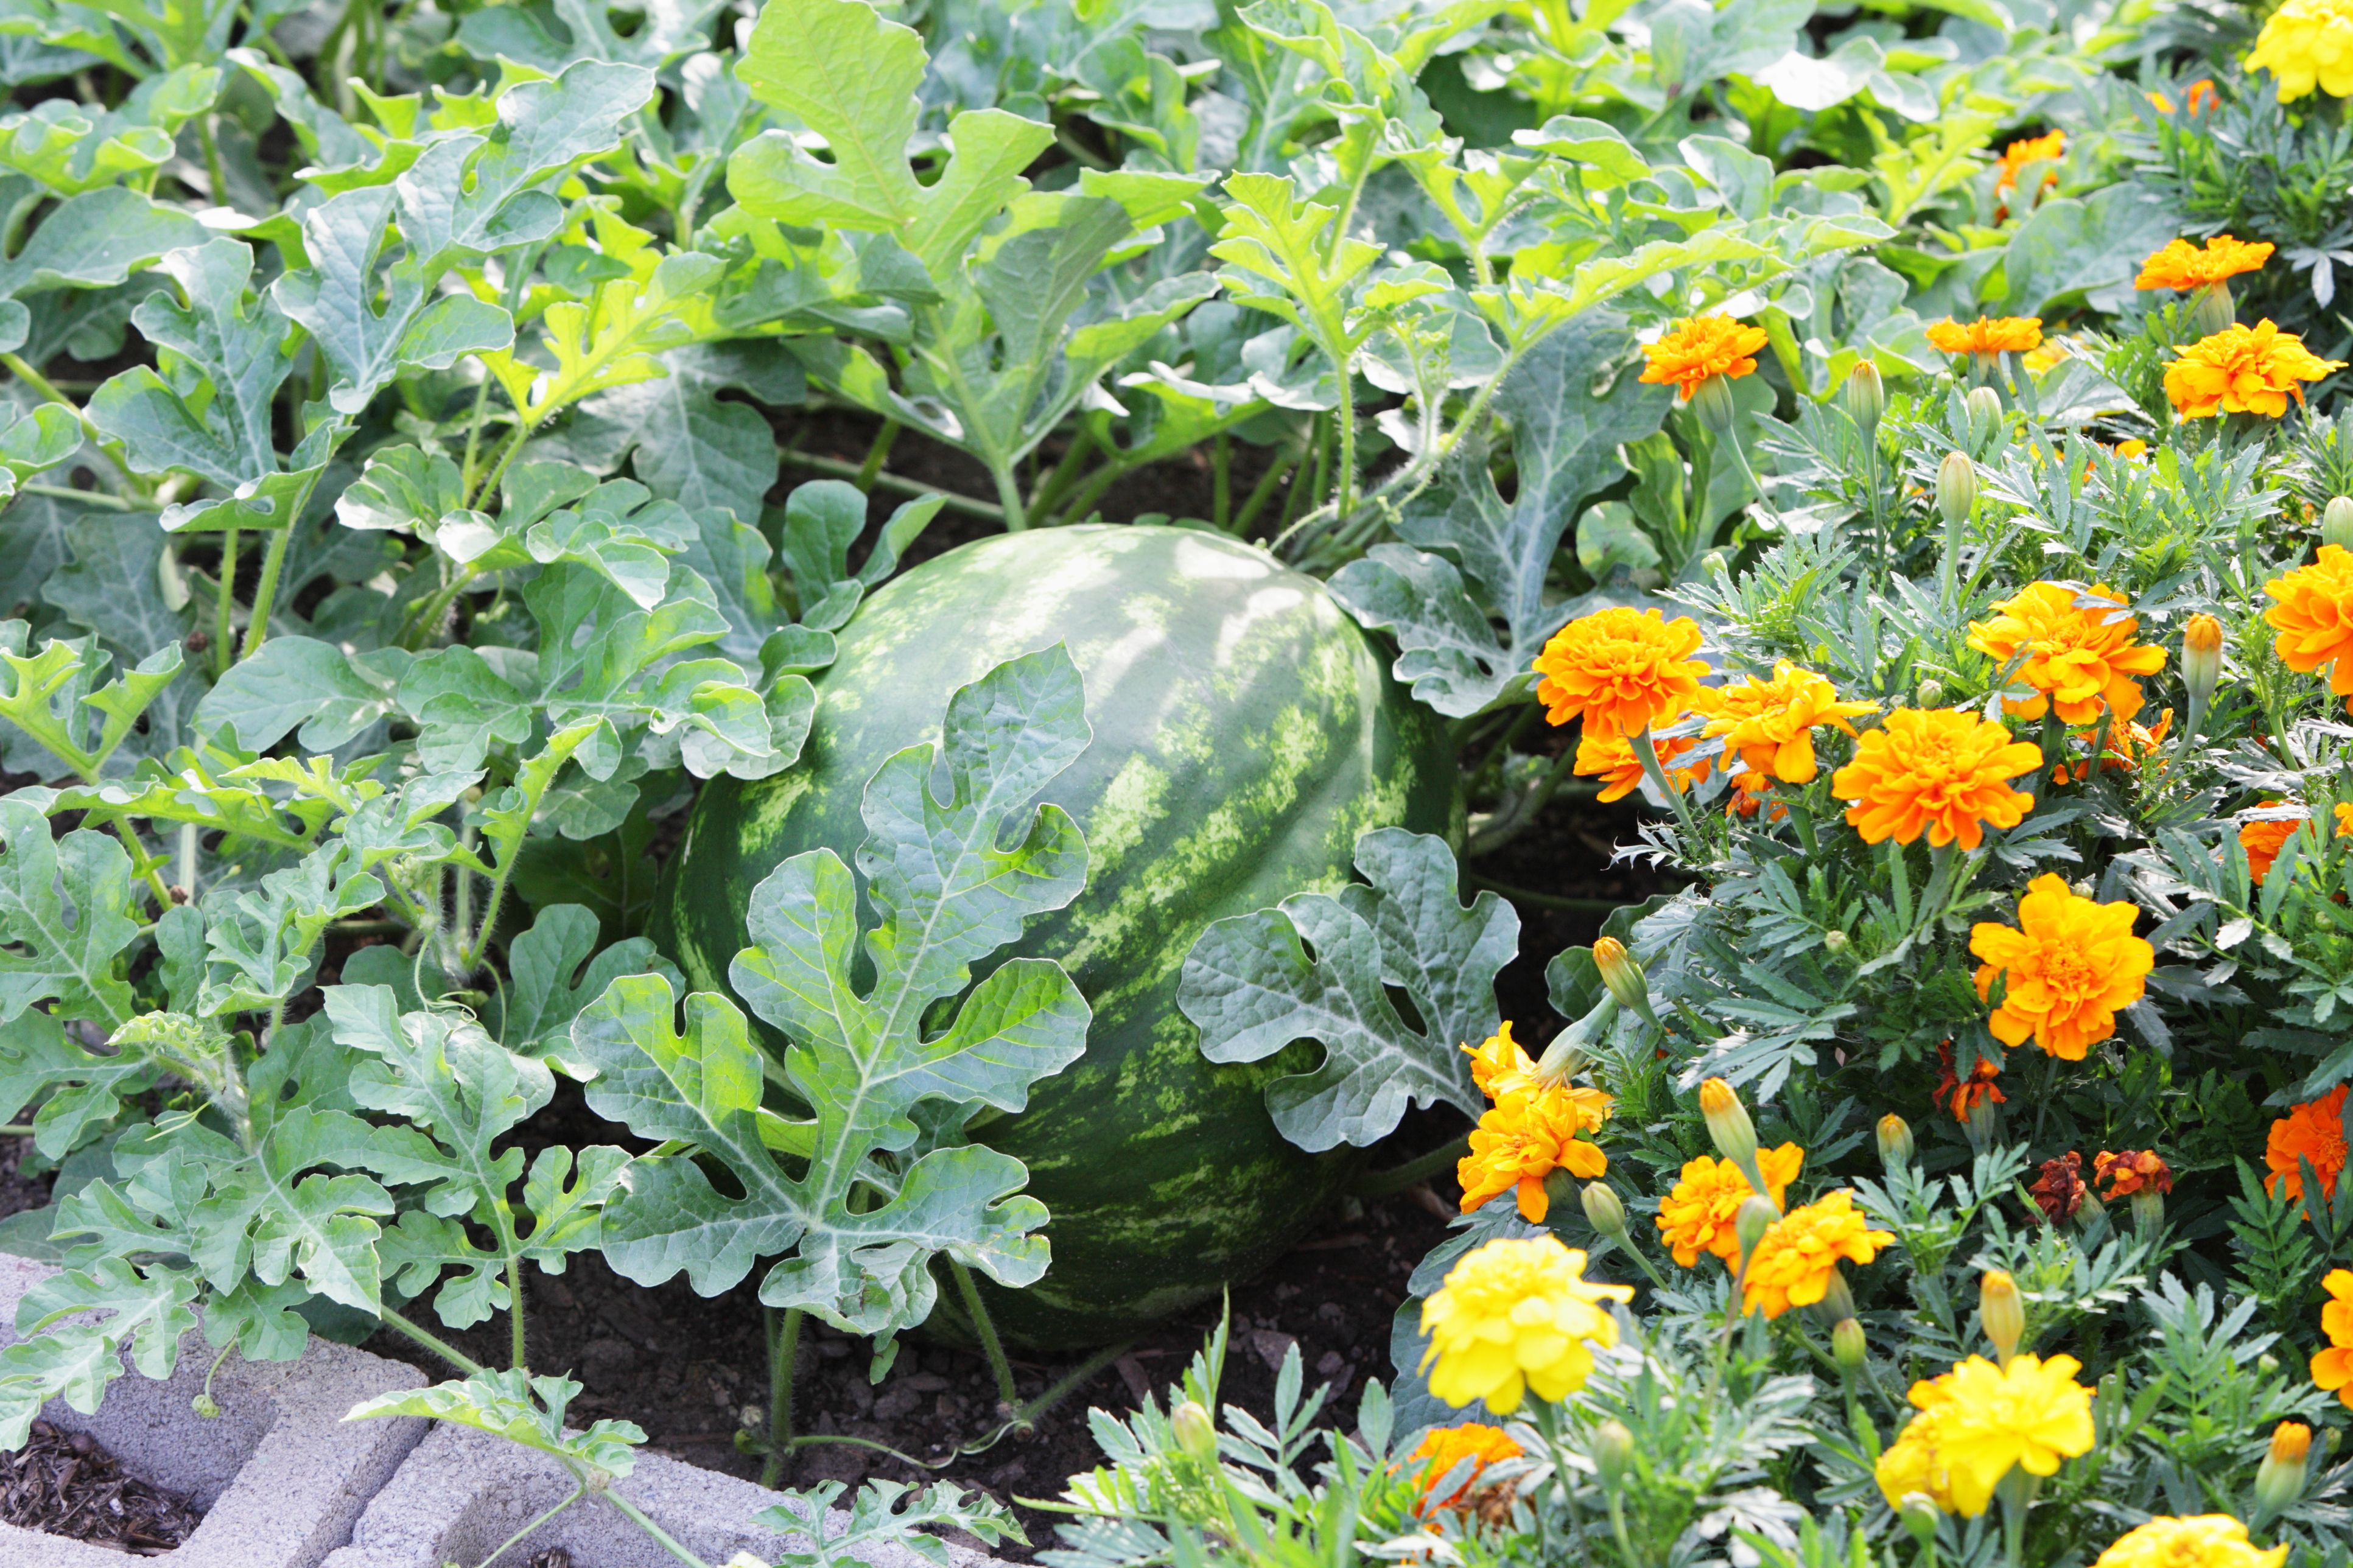 Image of Marigolds as companion plants for watermelon